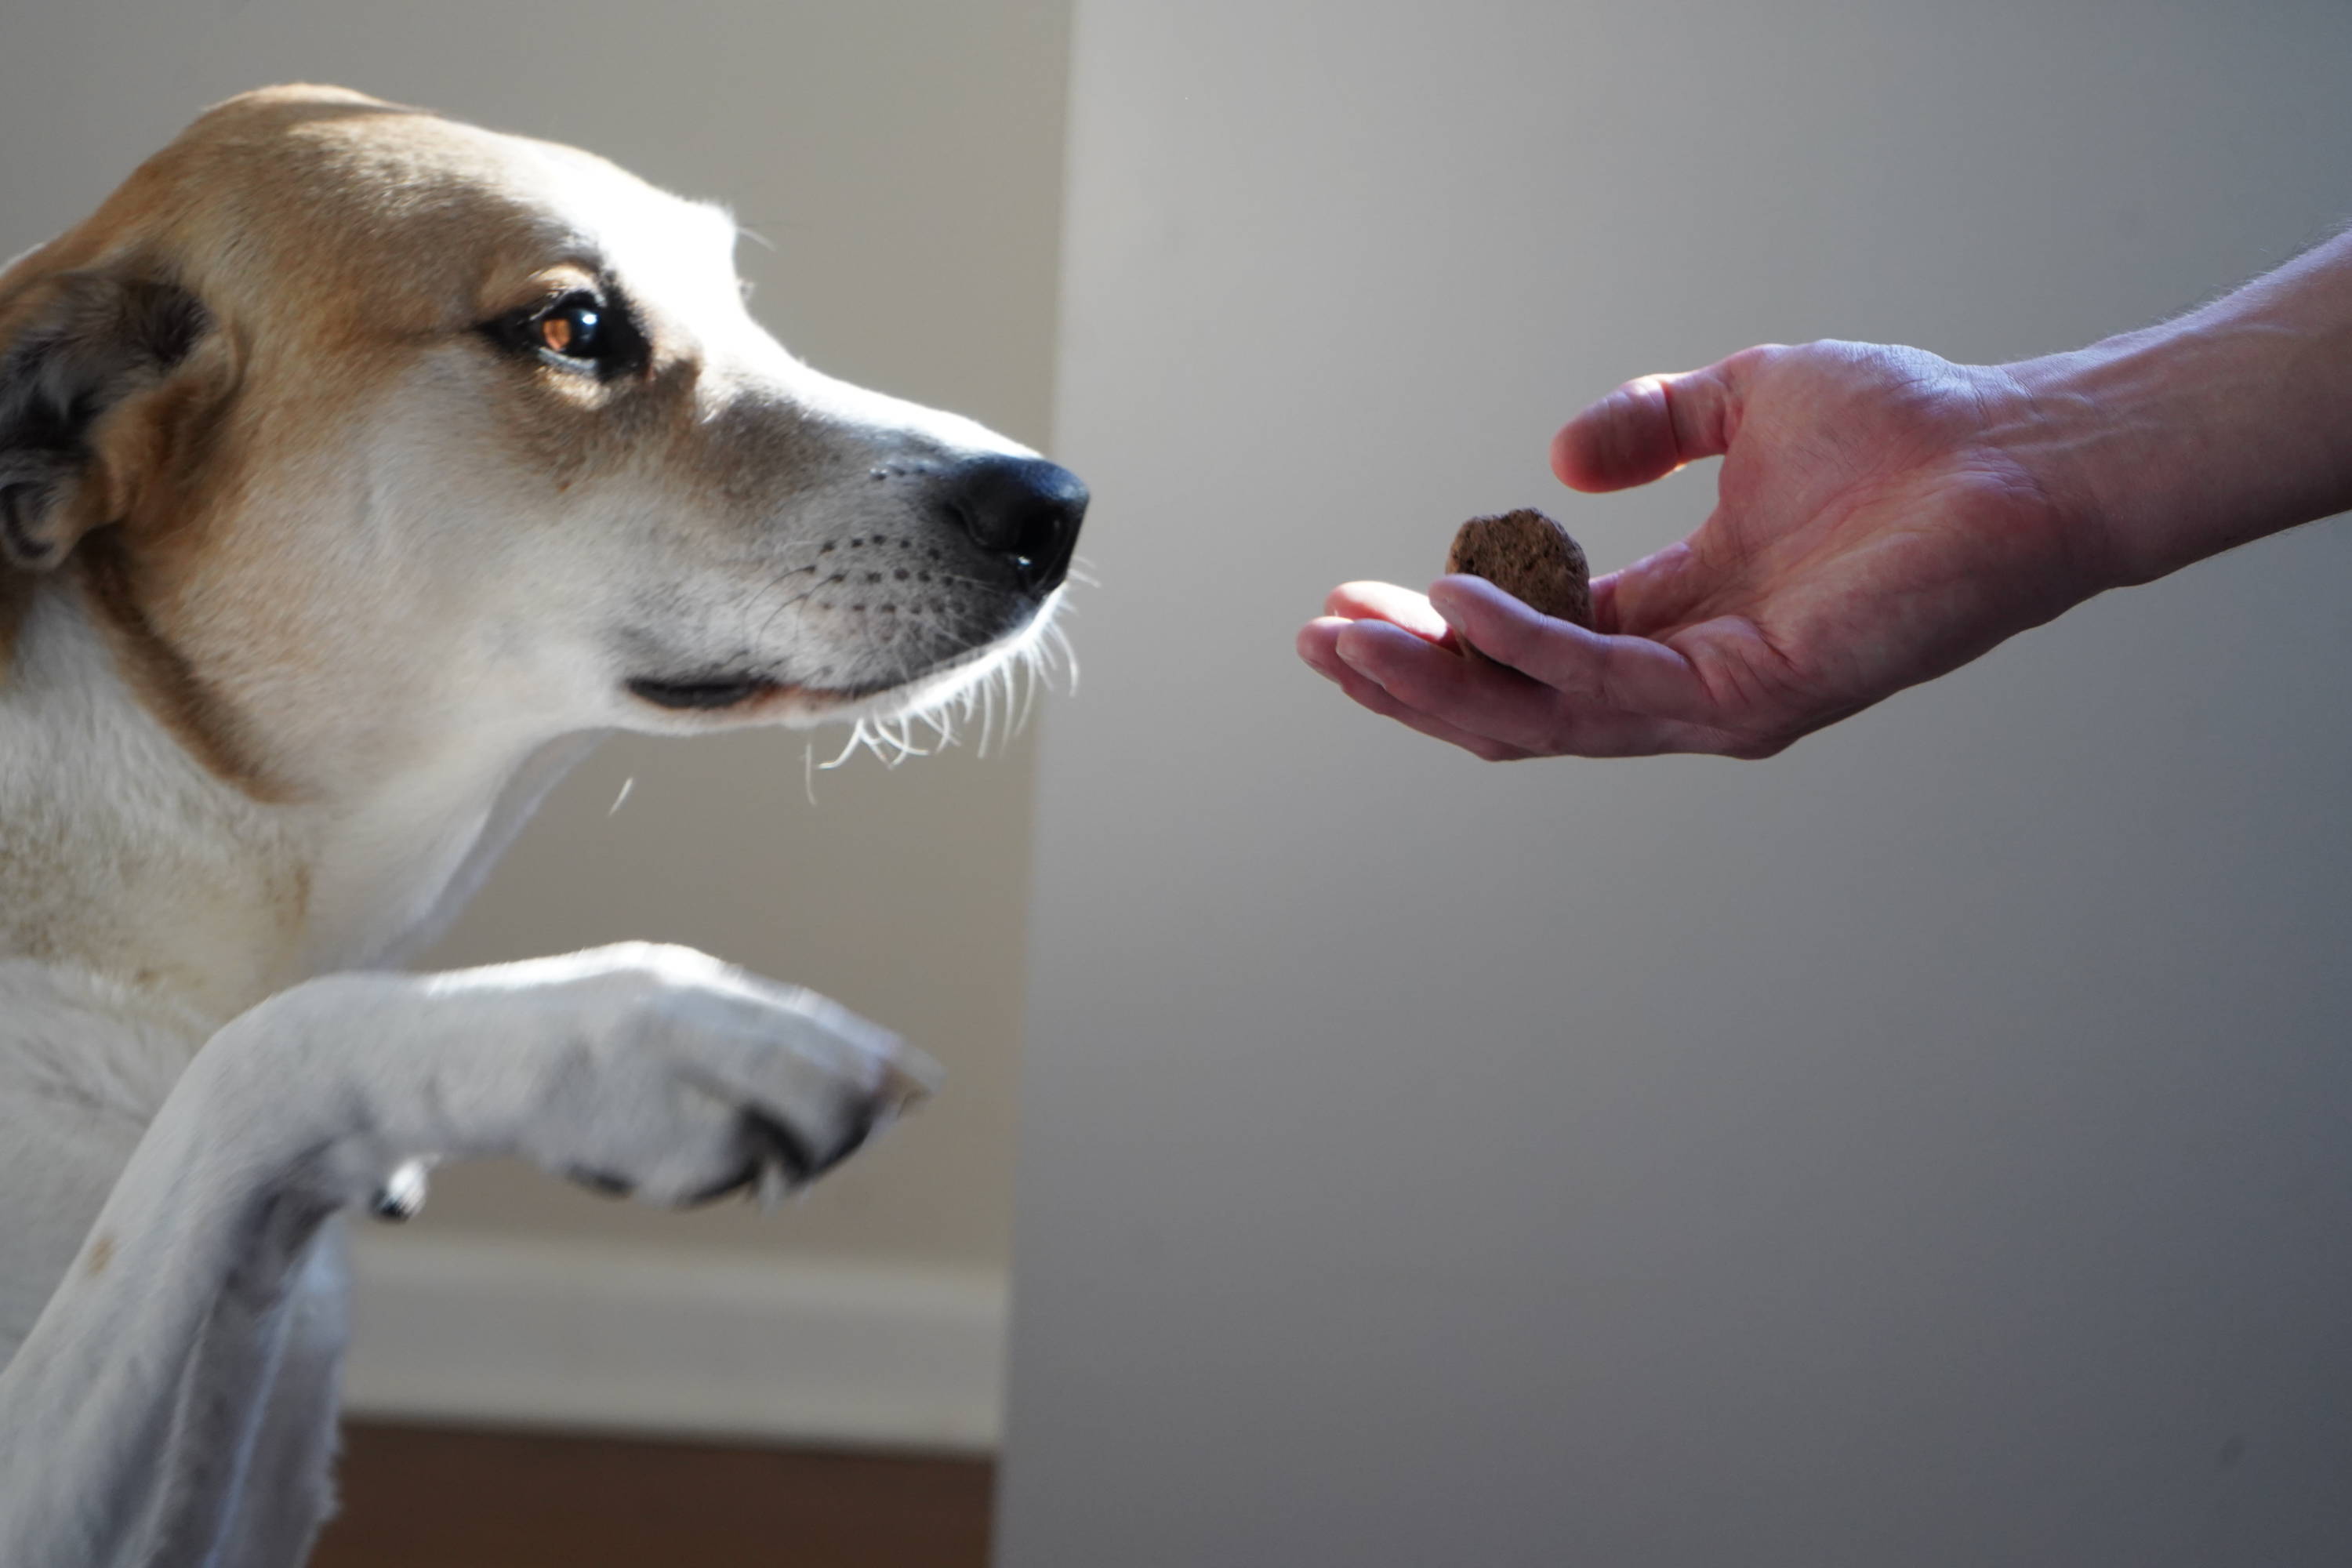 On the left, a dog holds out paw waiting for a treat. On the right, a man's hand holds a treat for the dog. 